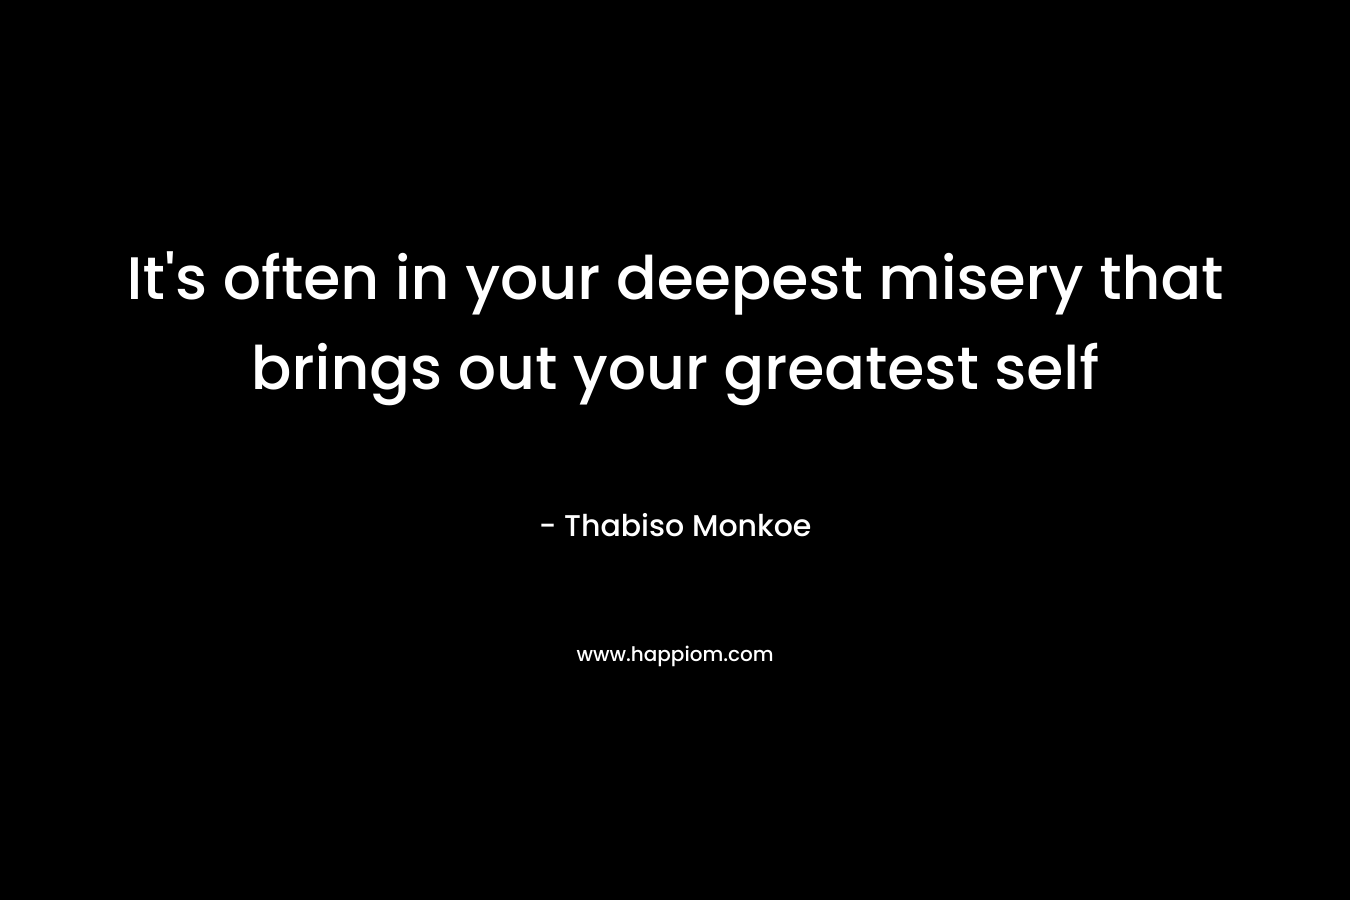 It's often in your deepest misery that brings out your greatest self